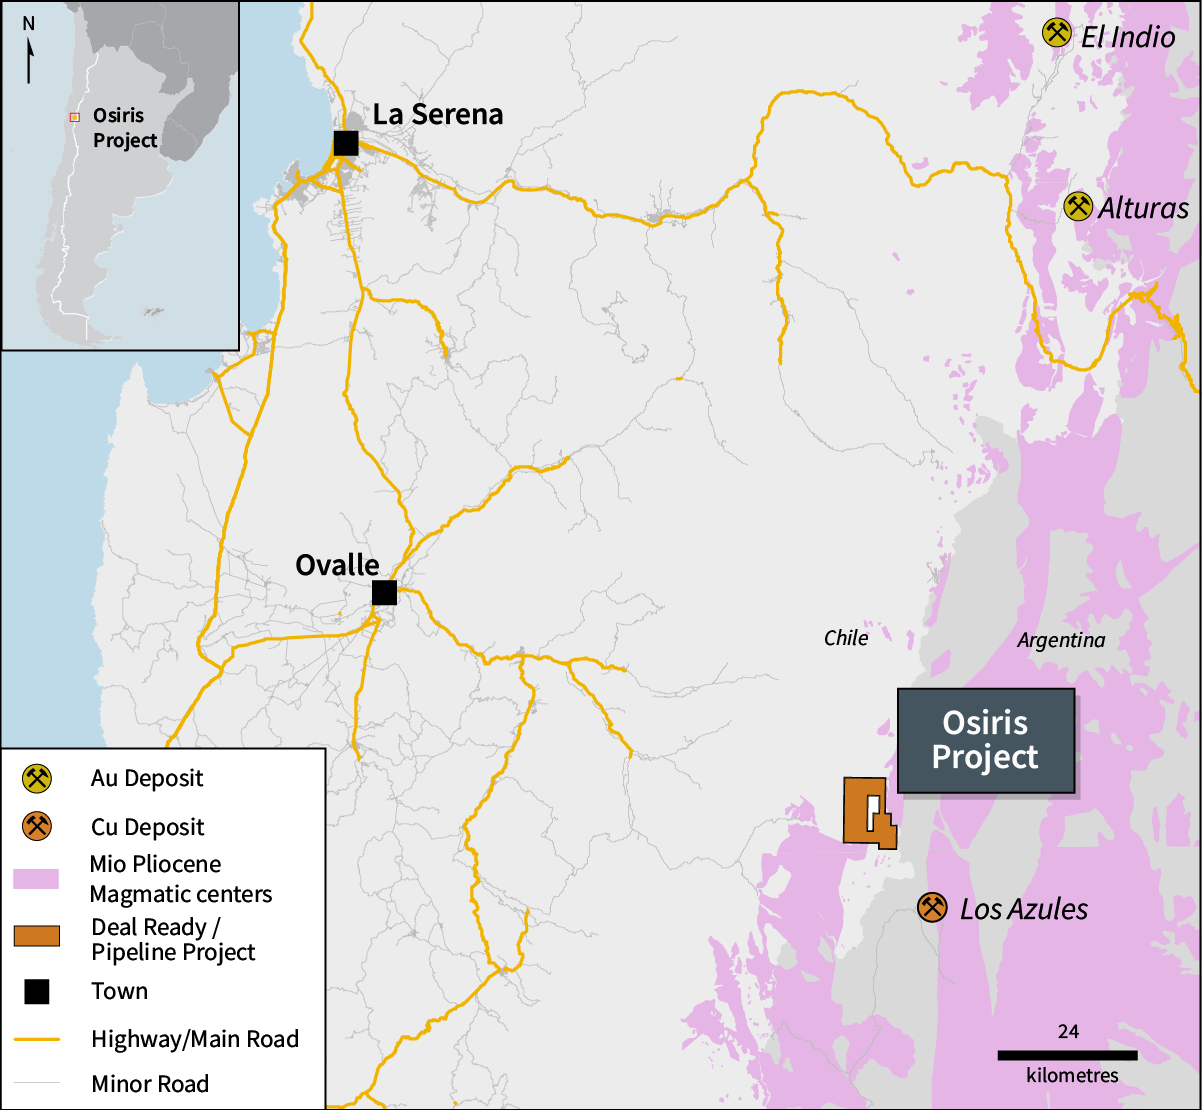 Mirasol Resources to Begin Copper Mining at the Osiris Project in Chile.